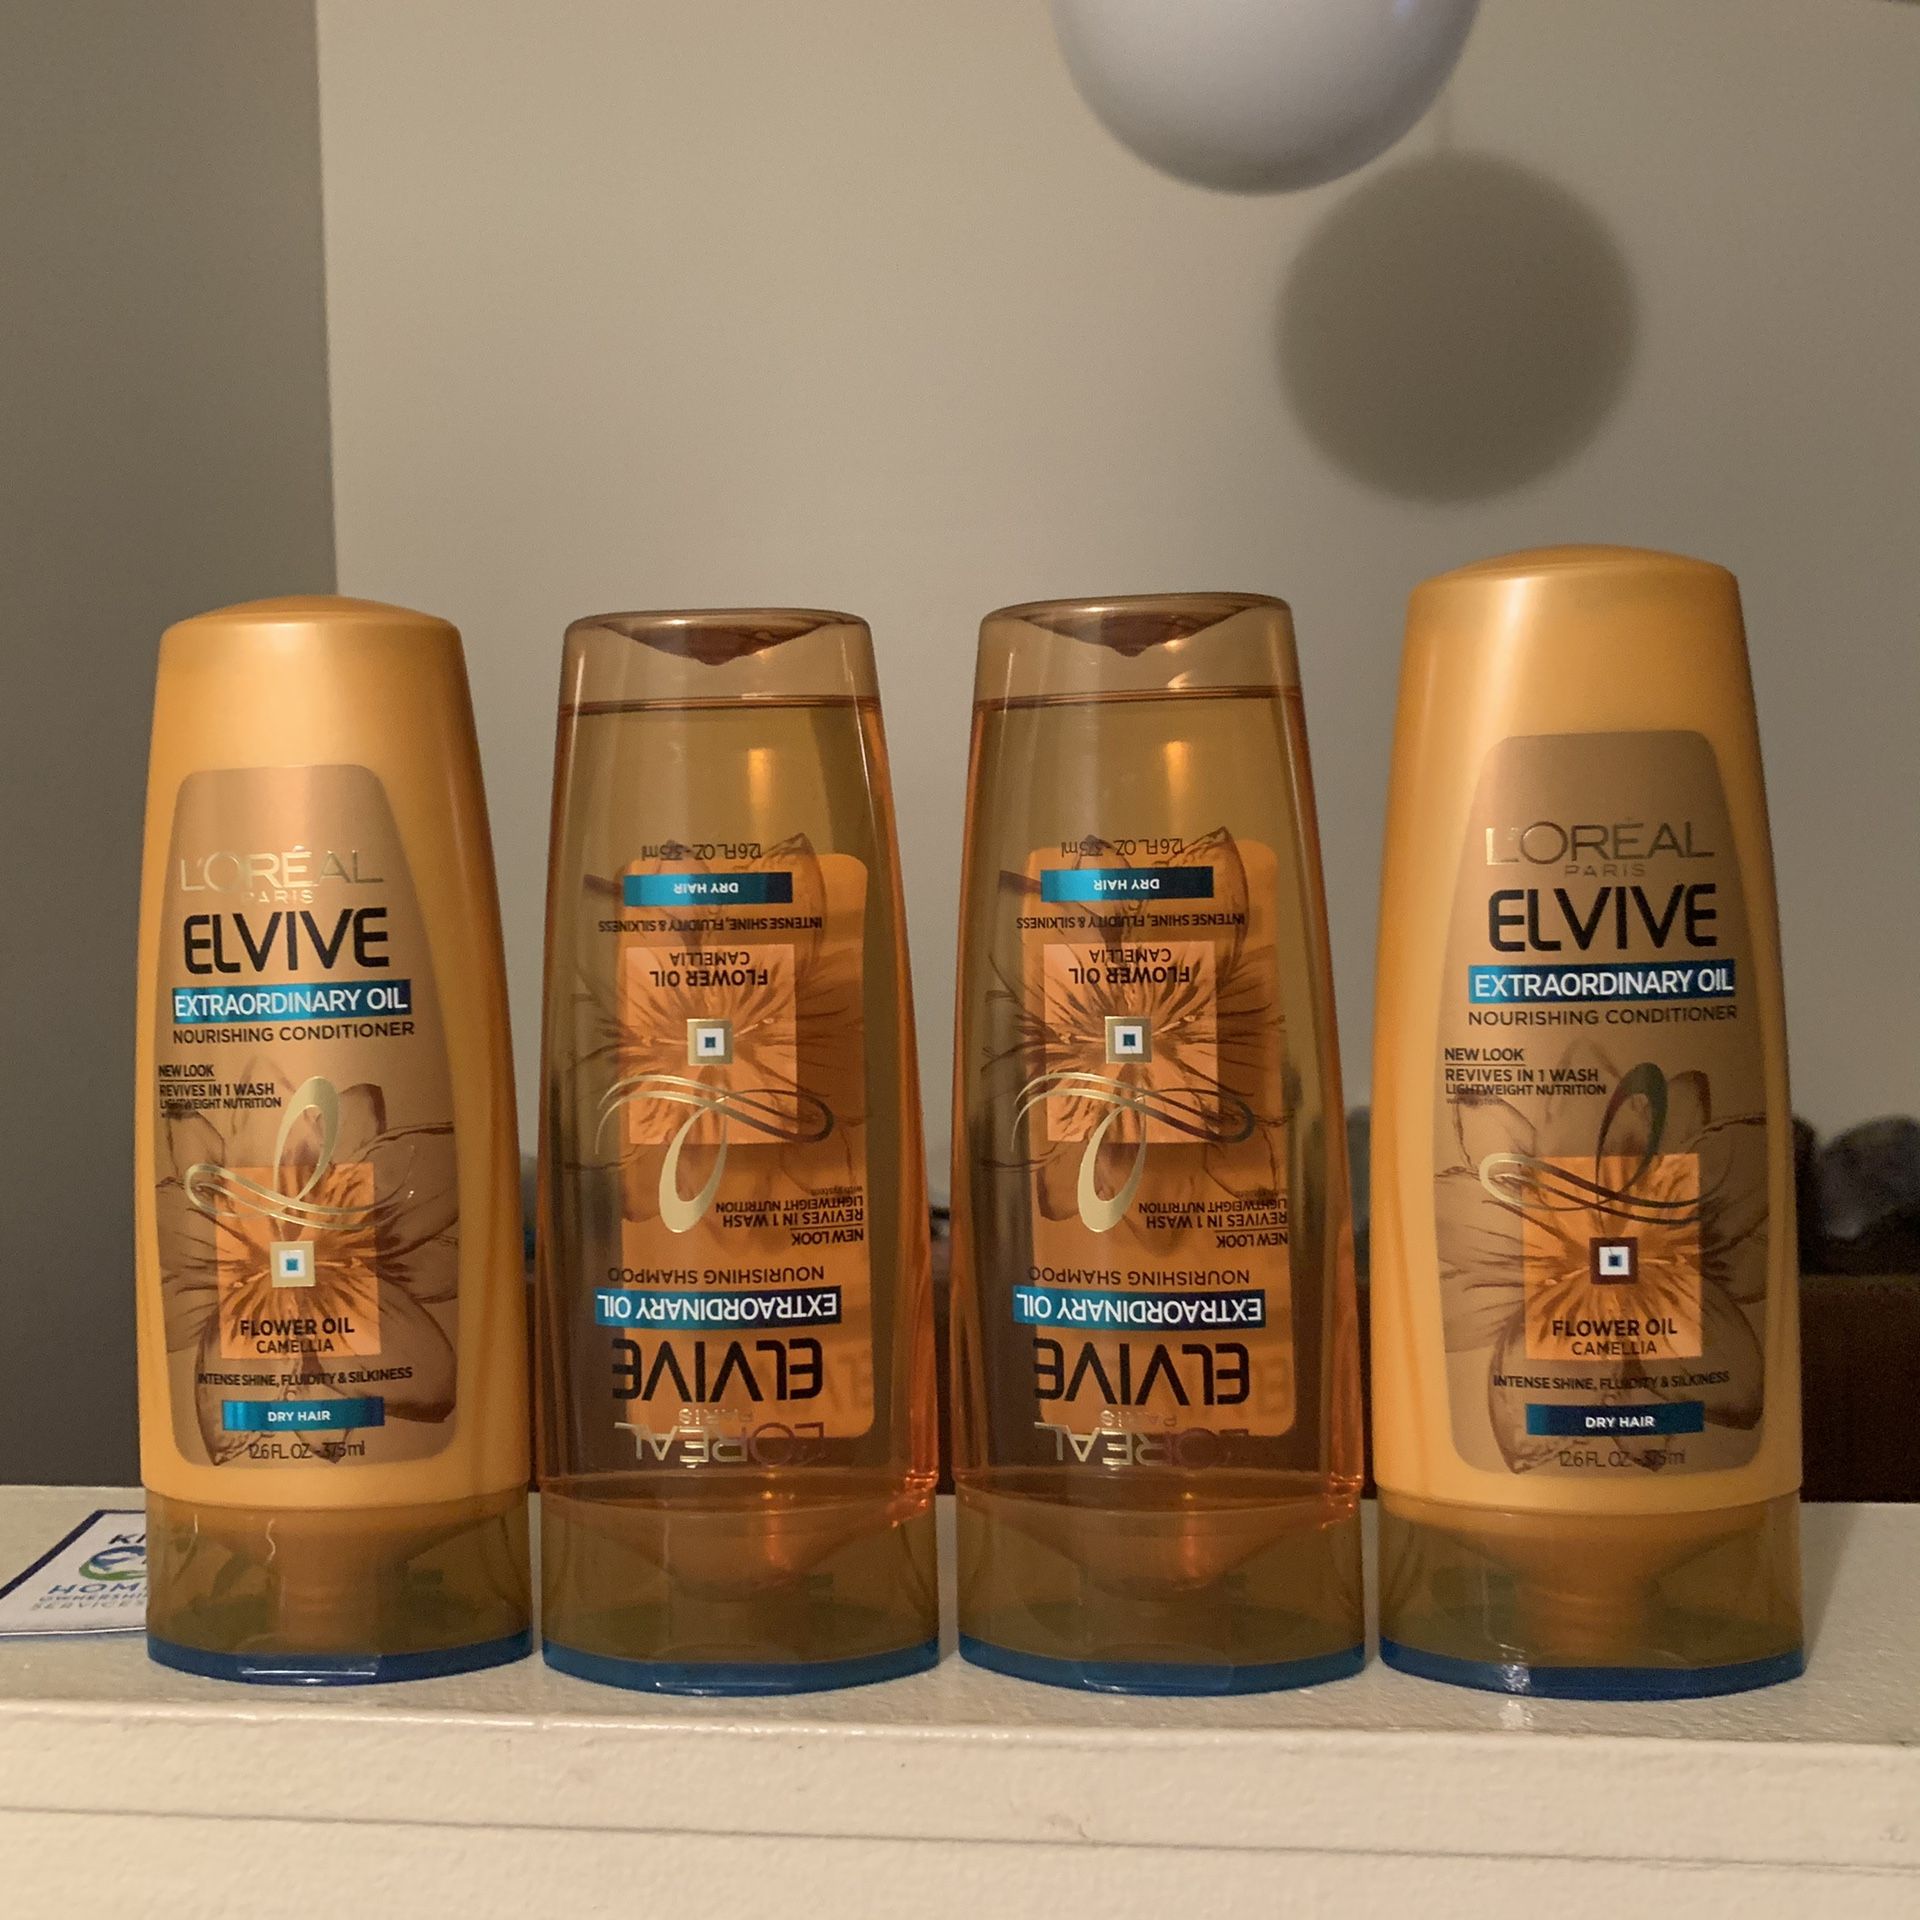 LOREAL SHAMPOO & CONDITIONER (everything in picture)